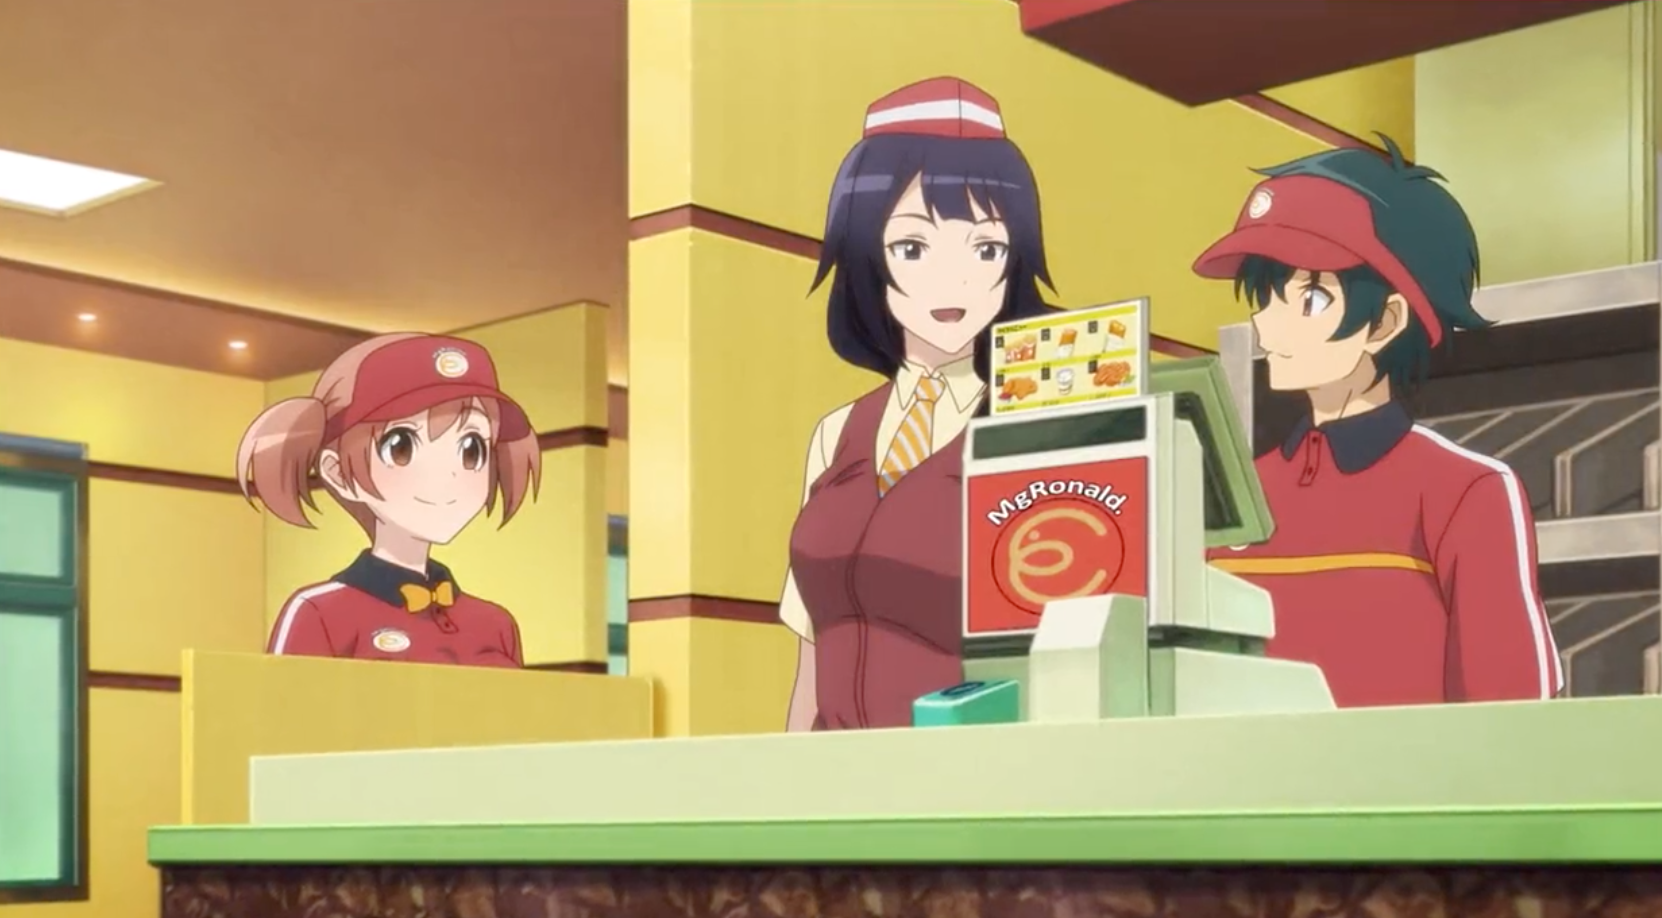 The Devil is a Part-Timer! Season 2 Sets July 14 Premiere with